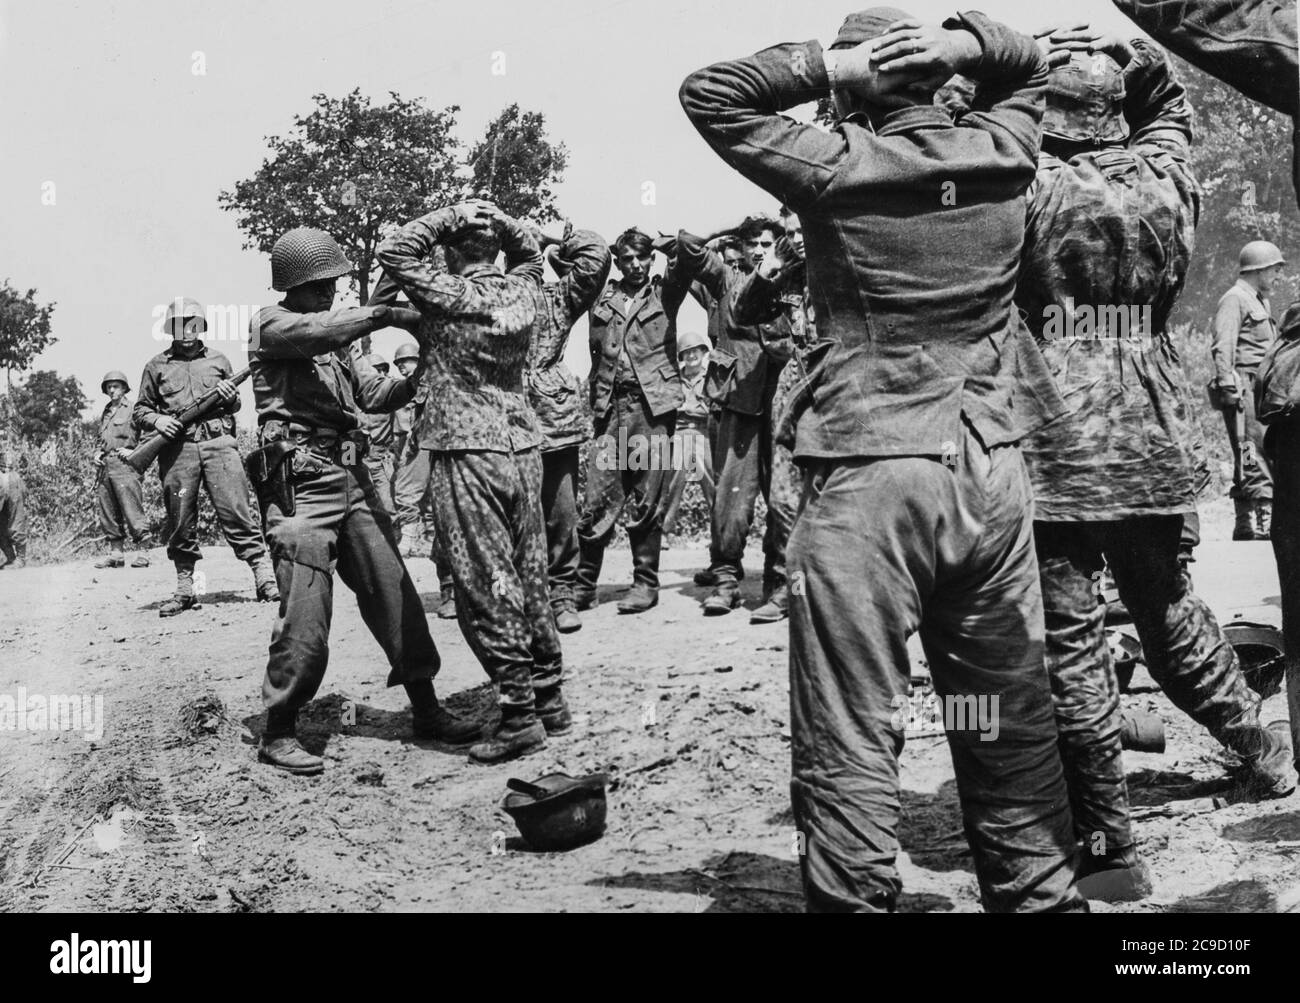 World War 2 - German Soldiers Surrendering to US Soldiers Stock Photo